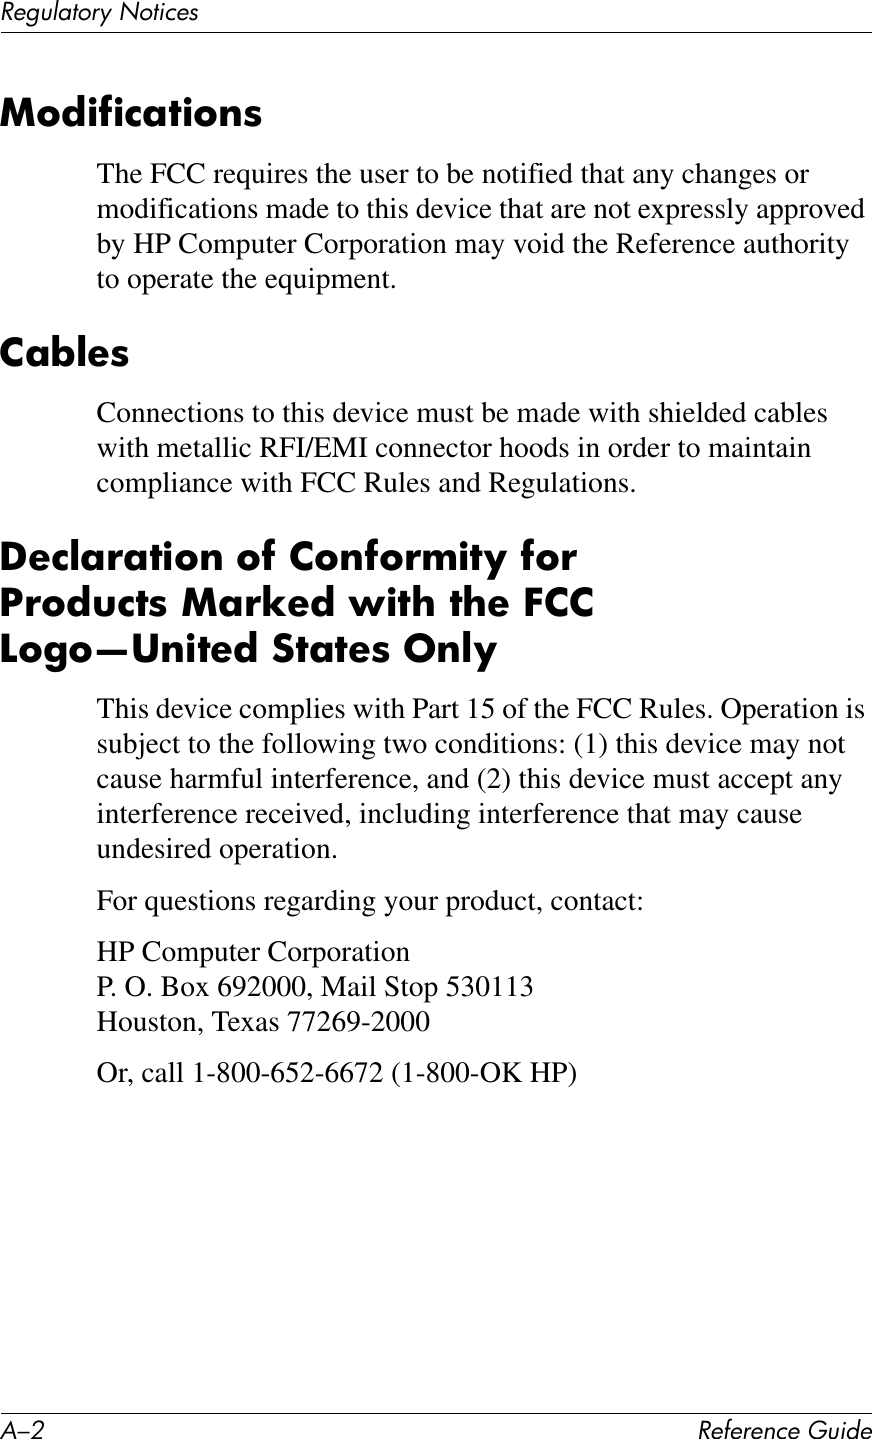 &lt;/0 !&quot;#&quot;$&quot;%&amp;&quot;&apos;()*+&quot;!&quot;2)K417$W&apos;N71*&amp;&quot;LY6*)#)%;7)6$8The FCC requires the user to be notified that any changes or modifications made to this device that are not expressly approved by HP Computer Corporation may void the Reference authority to operate the equipment.2;W@&quot;8Connections to this device must be made with shielded cables with metallic RFI/EMI connector hoods in order to maintain compliance with FCC Rules and Regulations.U&quot;%@;!;7)6$&amp;6#&amp;26$#6!I)7O&amp;#6!&amp;S!6*(%78 Y;!T&quot;*&amp;L)7?&amp;7?&quot;&amp;E22&amp;A6&apos;6i3$)7&quot;* :7;7&quot;8 5$@OThis device complies with Part 15 of the FCC Rules. Operation is subject to the following two conditions: (1) this device may not cause harmful interference, and (2) this device must accept any interference received, including interference that may cause undesired operation.For questions regarding your product, contact:HP Computer CorporationP. O. Box 692000, Mail Stop 530113Houston, Texas 77269-2000Or, call 1-800-652-6672 (1-800-OK HP)